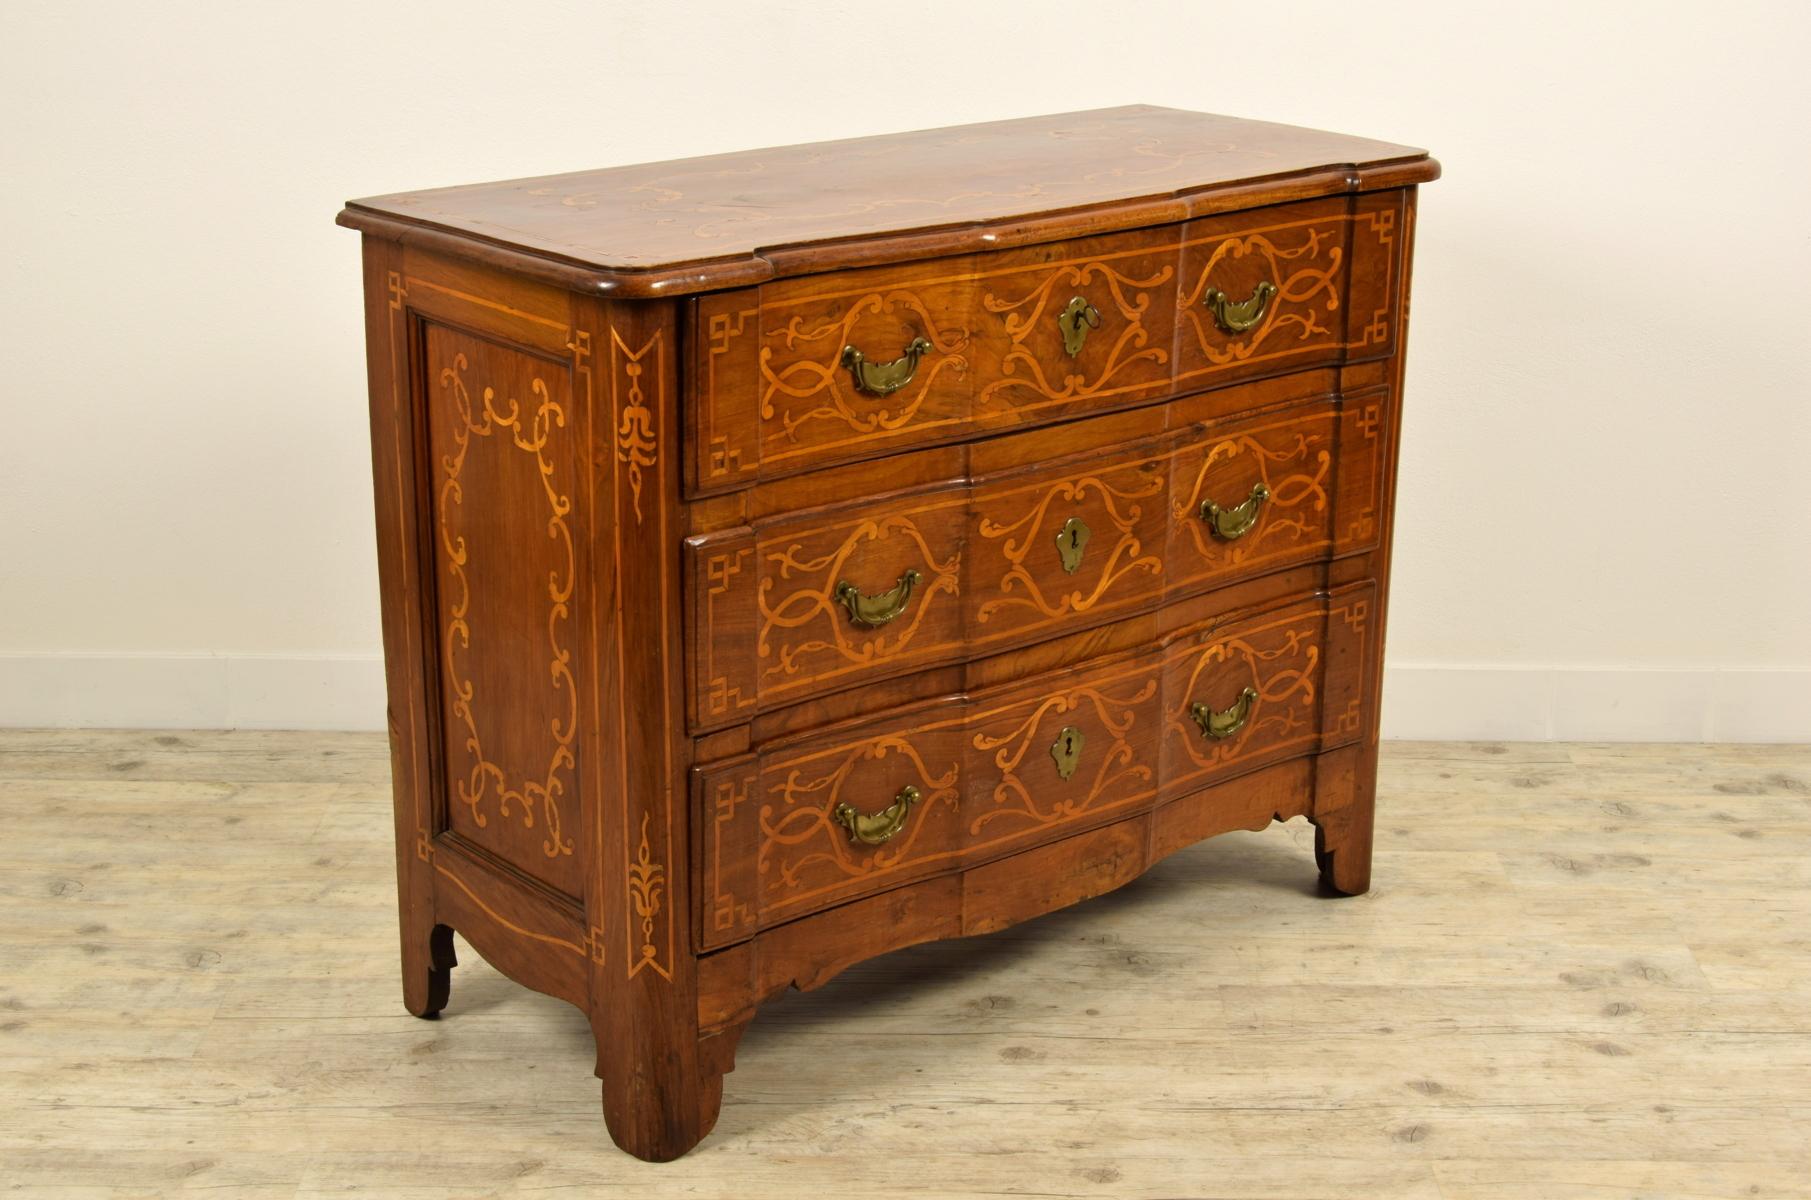 18th century, Italian inlaid walnut wood chest of drawers

Chest of drawers made in the first half of the 18th century in Piedmont (north of Italy). The chest of drawers is made of solid walnut wood decorated with refined geometric and